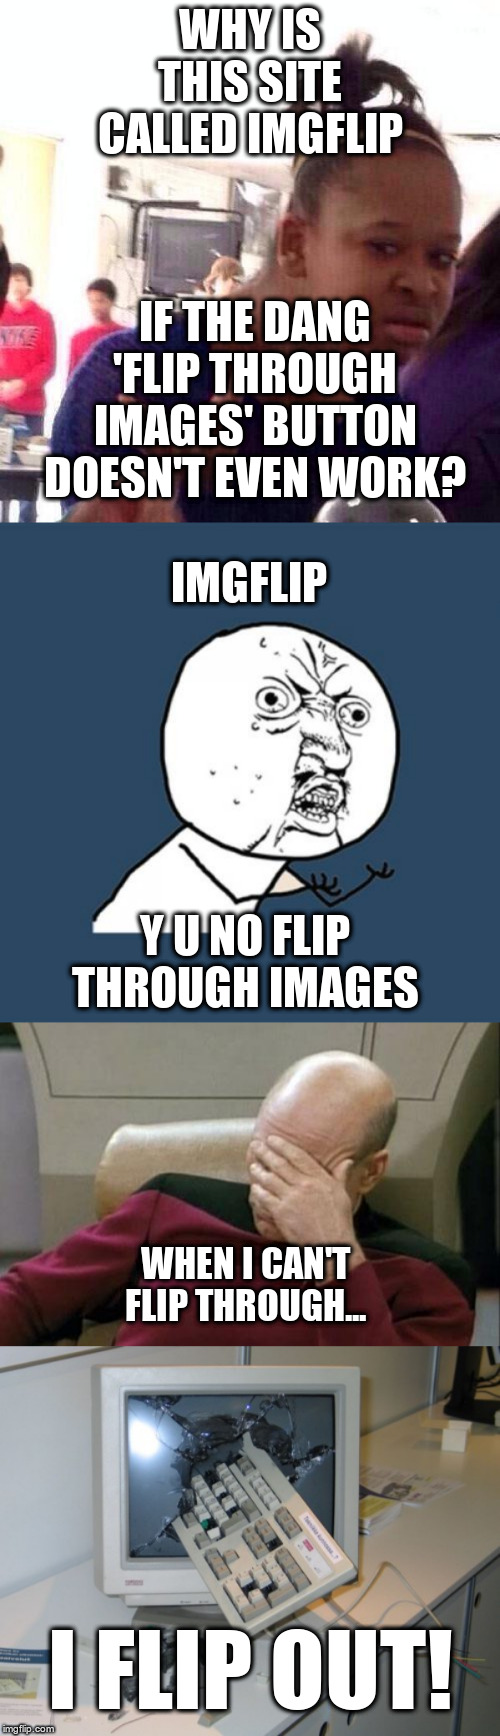 Anyone else have this problem??? That button is a joke! | WHY IS THIS SITE CALLED IMGFLIP; IF THE DANG 'FLIP THROUGH IMAGES' BUTTON DOESN'T EVEN WORK? IMGFLIP; Y U NO FLIP THROUGH IMAGES; WHEN I CAN'T FLIP THROUGH... I FLIP OUT! | image tagged in memes,y u no,captain picard facepalm,black girl wat,broken computer,meanwhile on imgflip | made w/ Imgflip meme maker